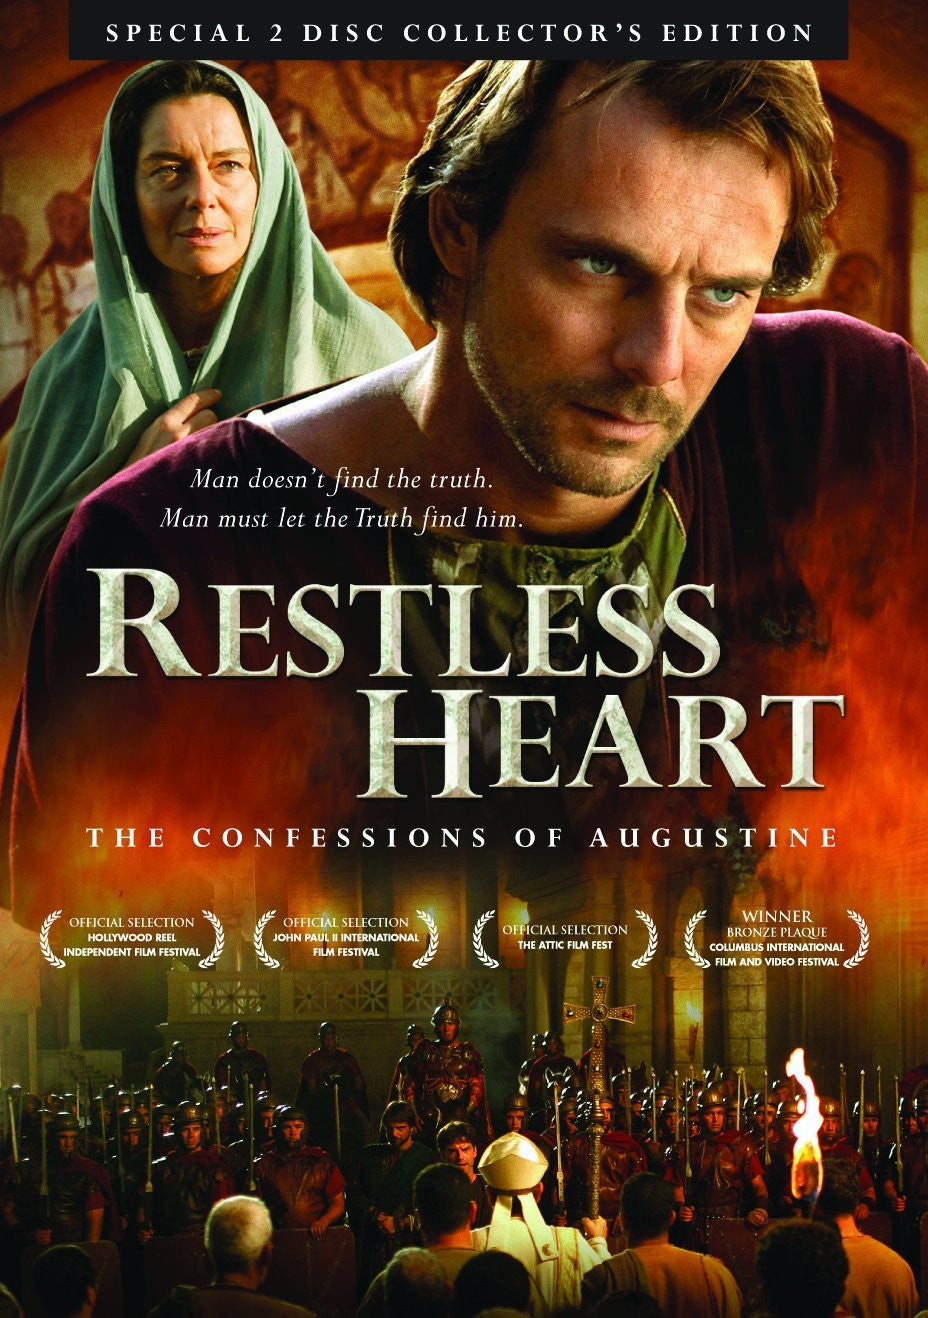 Restless Heart The Confessions of Augustine (DVD)